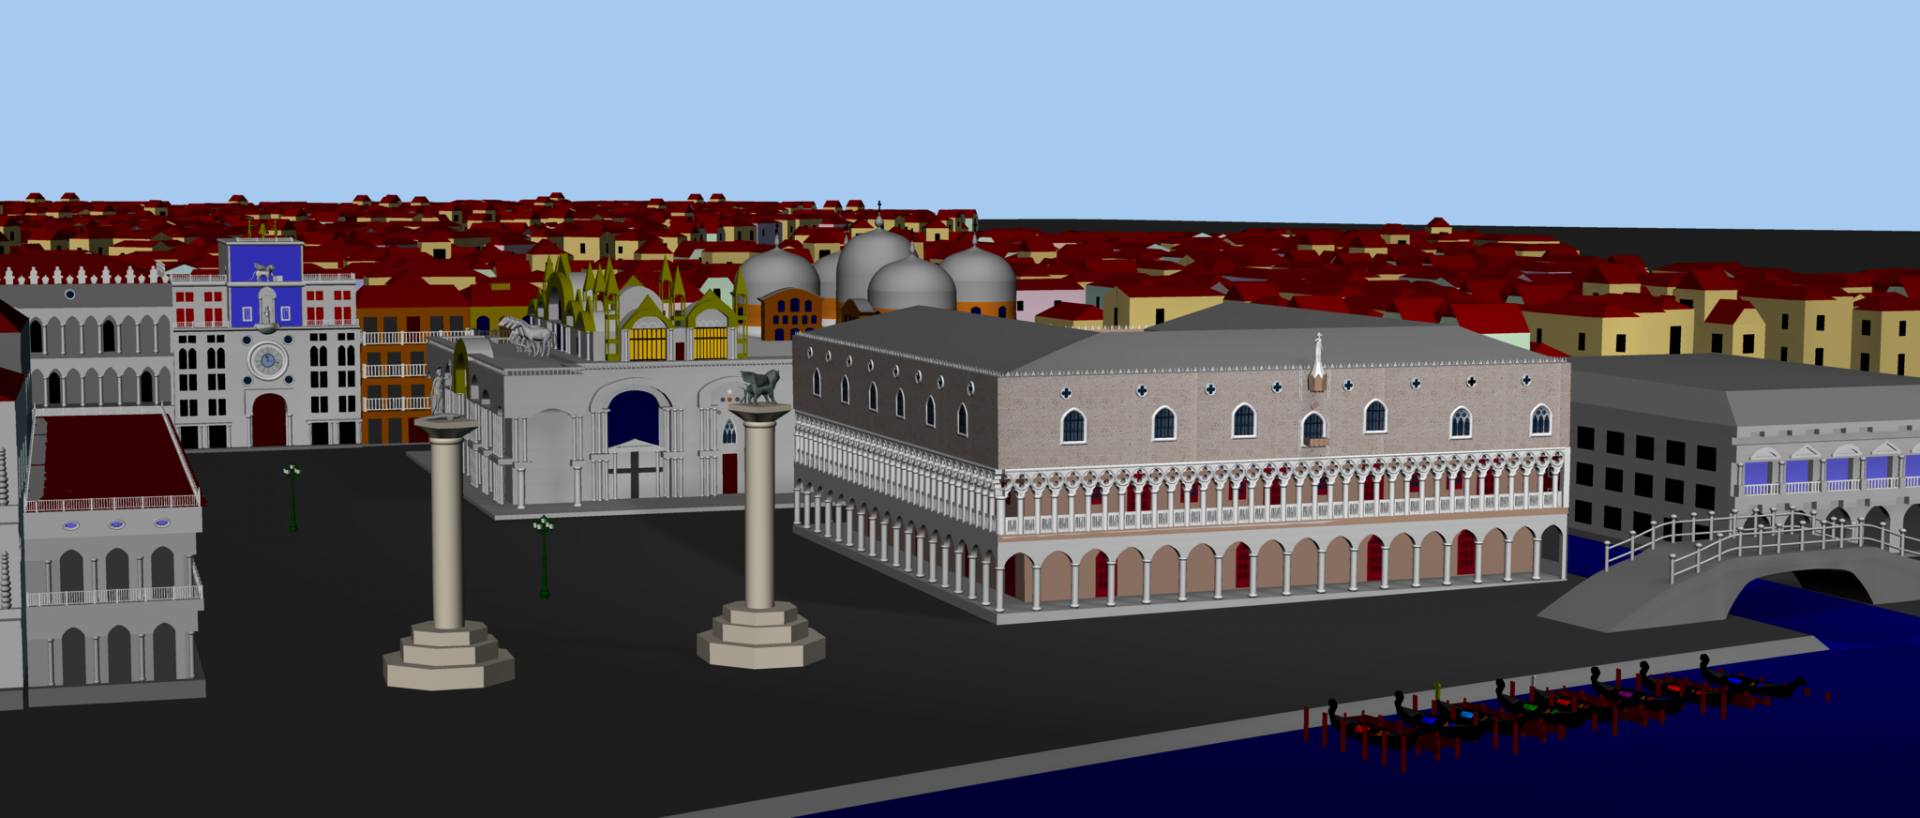 02 Venice in progress different angle regular lights0.png